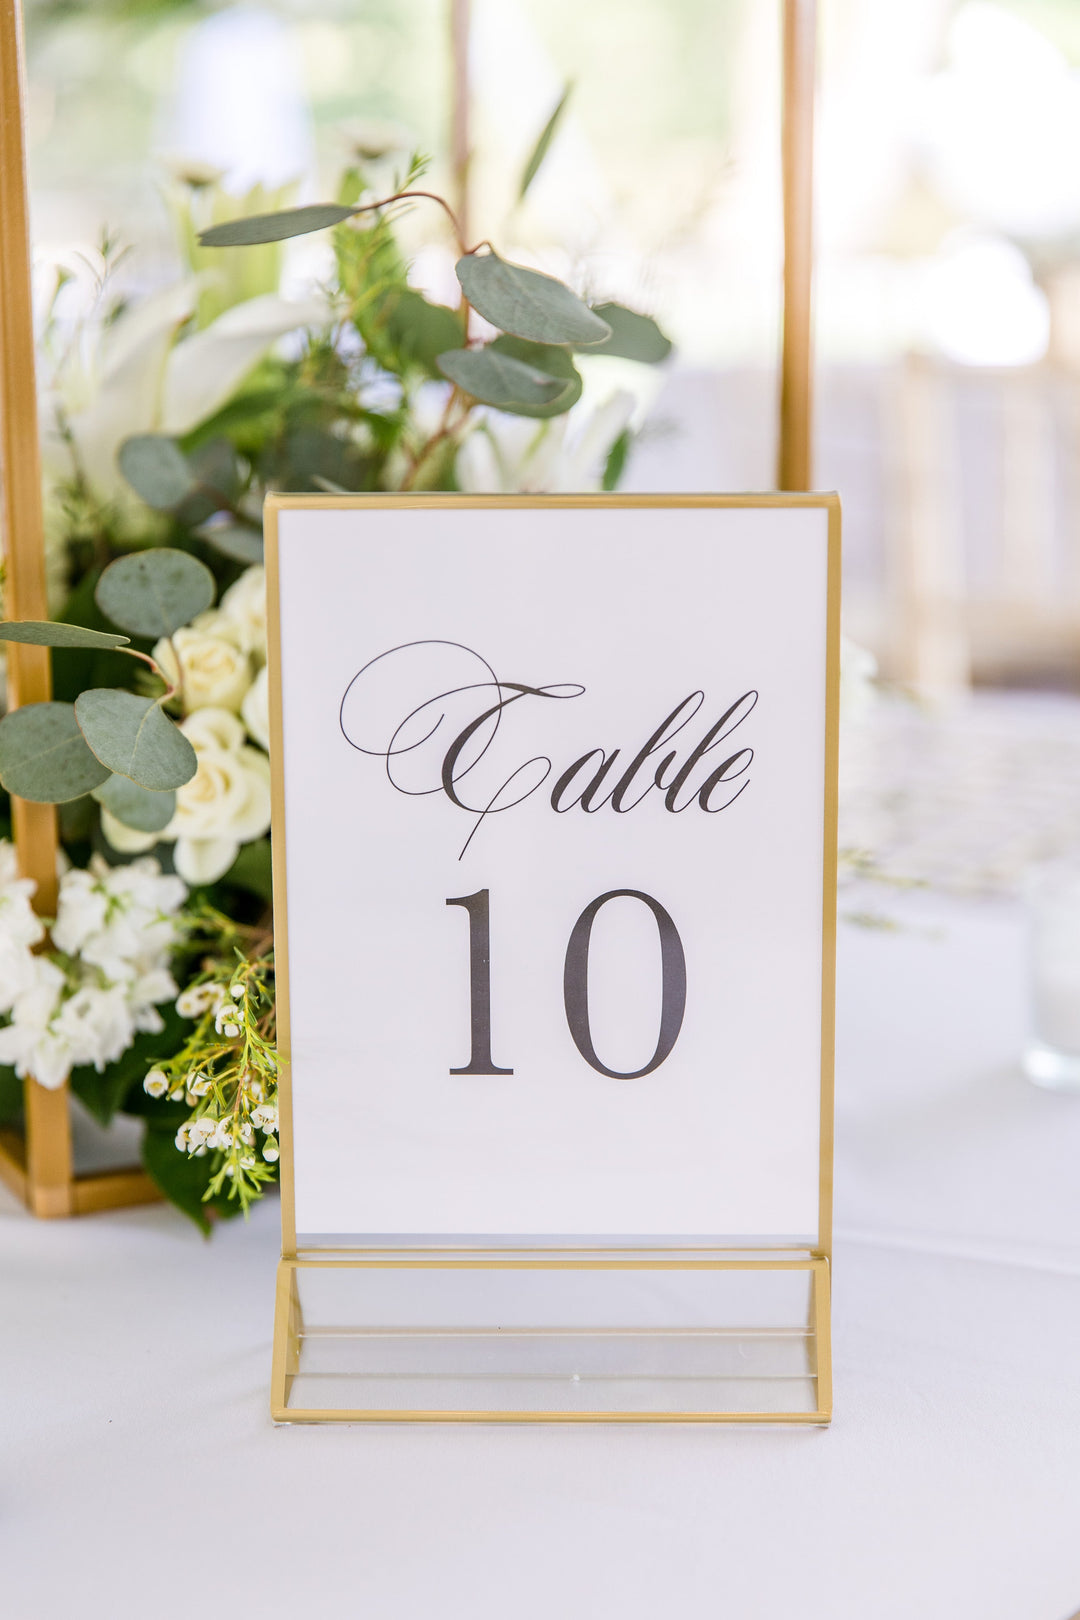 The Carrie Table Number